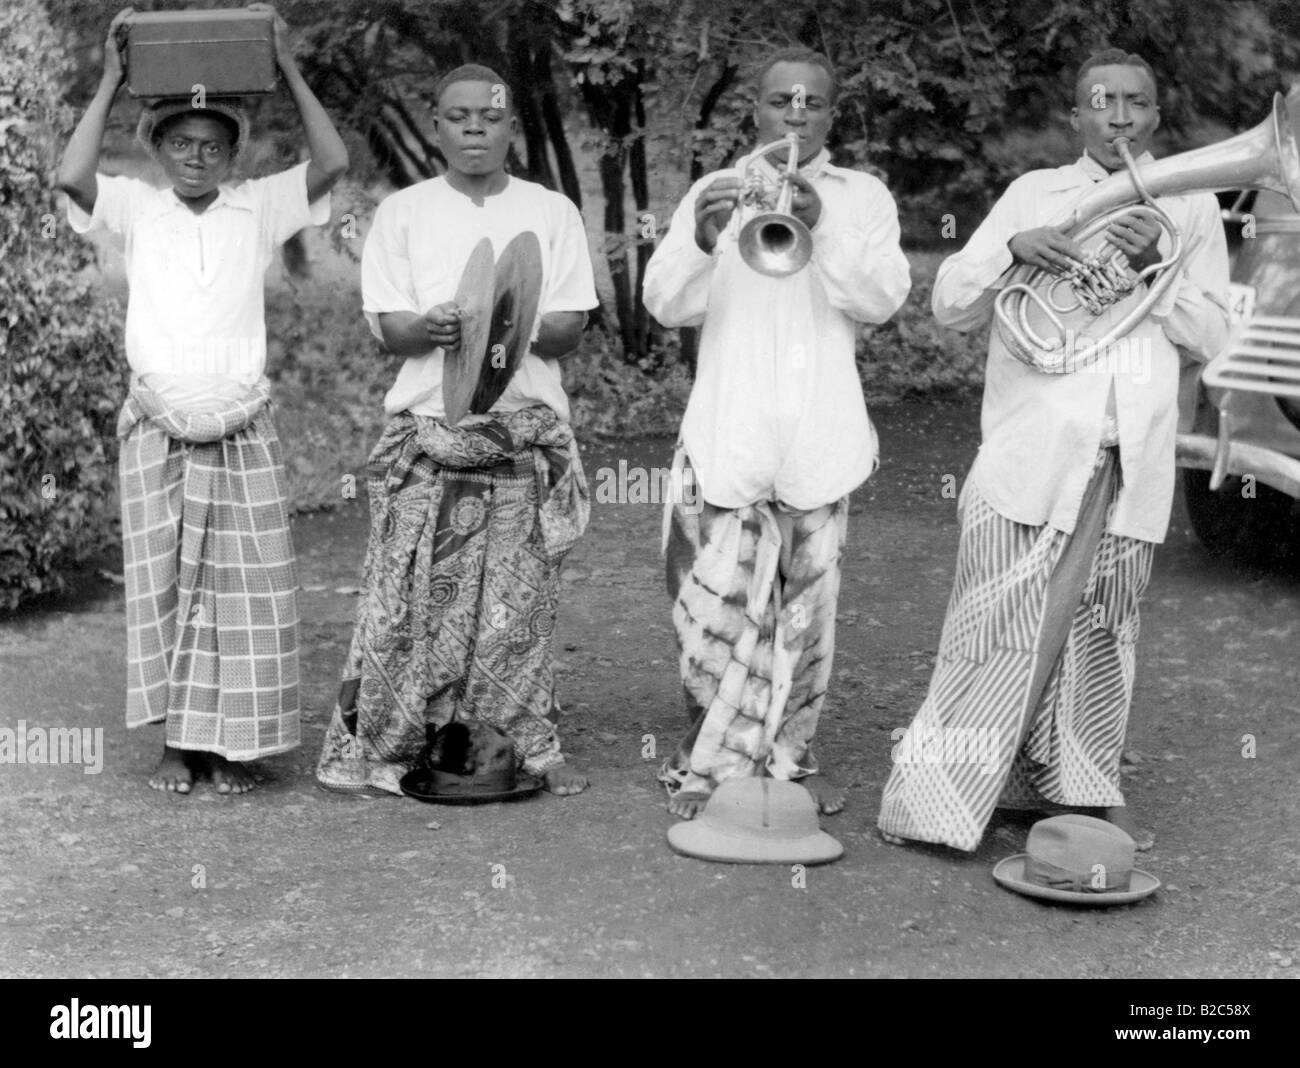 African musicians with European instruments, historical photo, circa 1930 Stock Photo